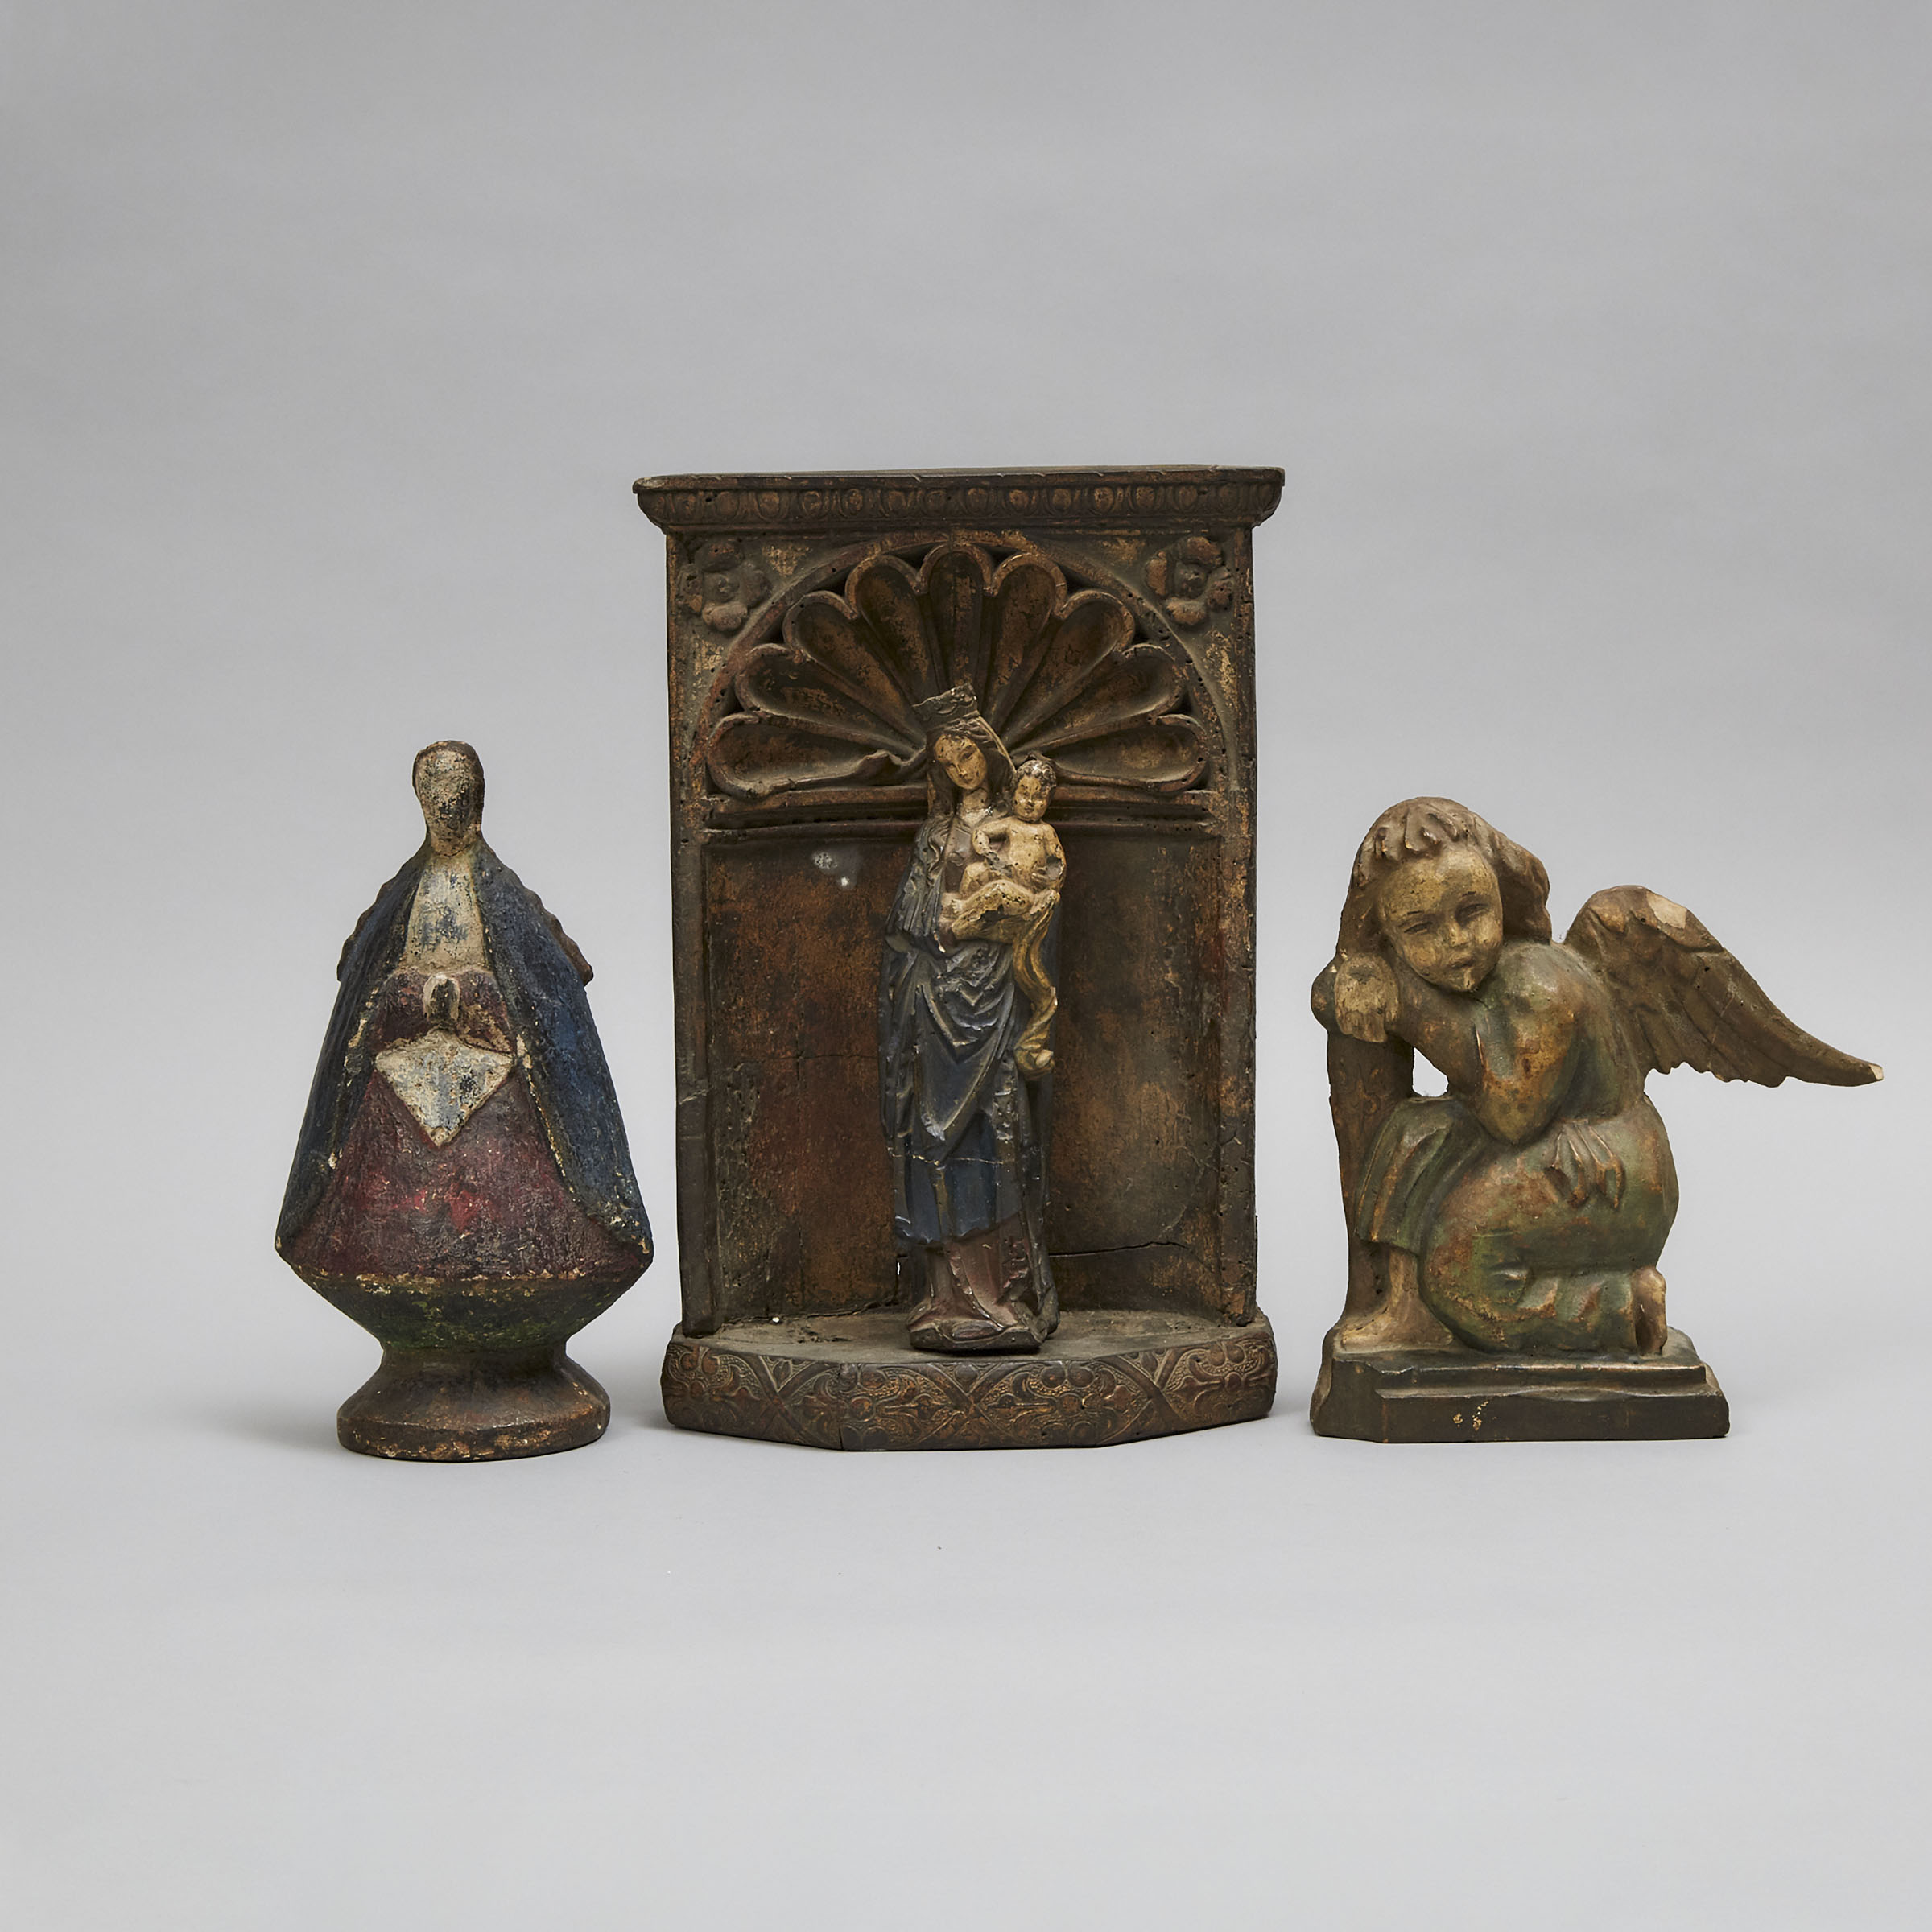 Three Polychromed Plaster Composite Ecclesiastical Figures, 19th/early 20th century